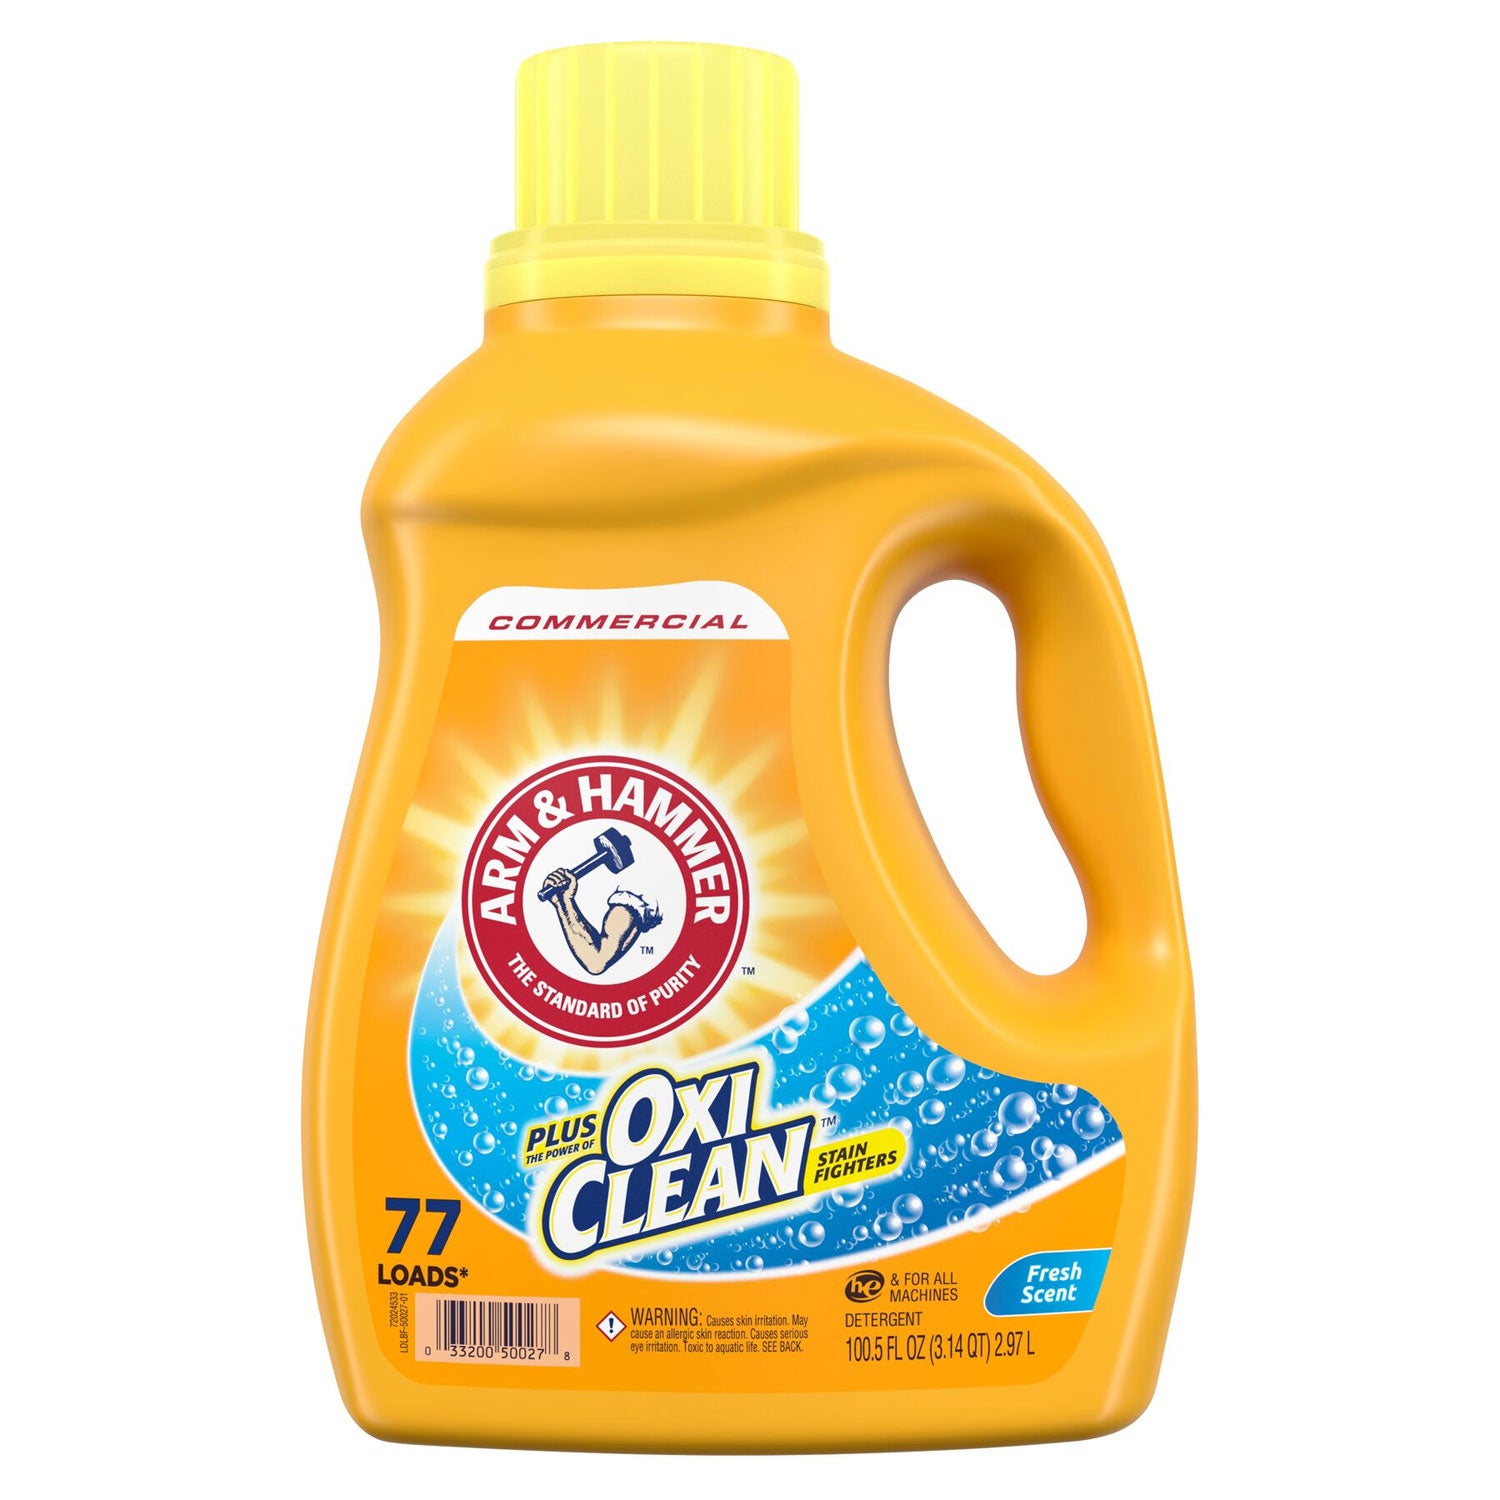 oxiclean-concentrated-liquid-laundry-detergent-fresh-1005-oz-bottle-4-carton_cdc3320050027 - 2